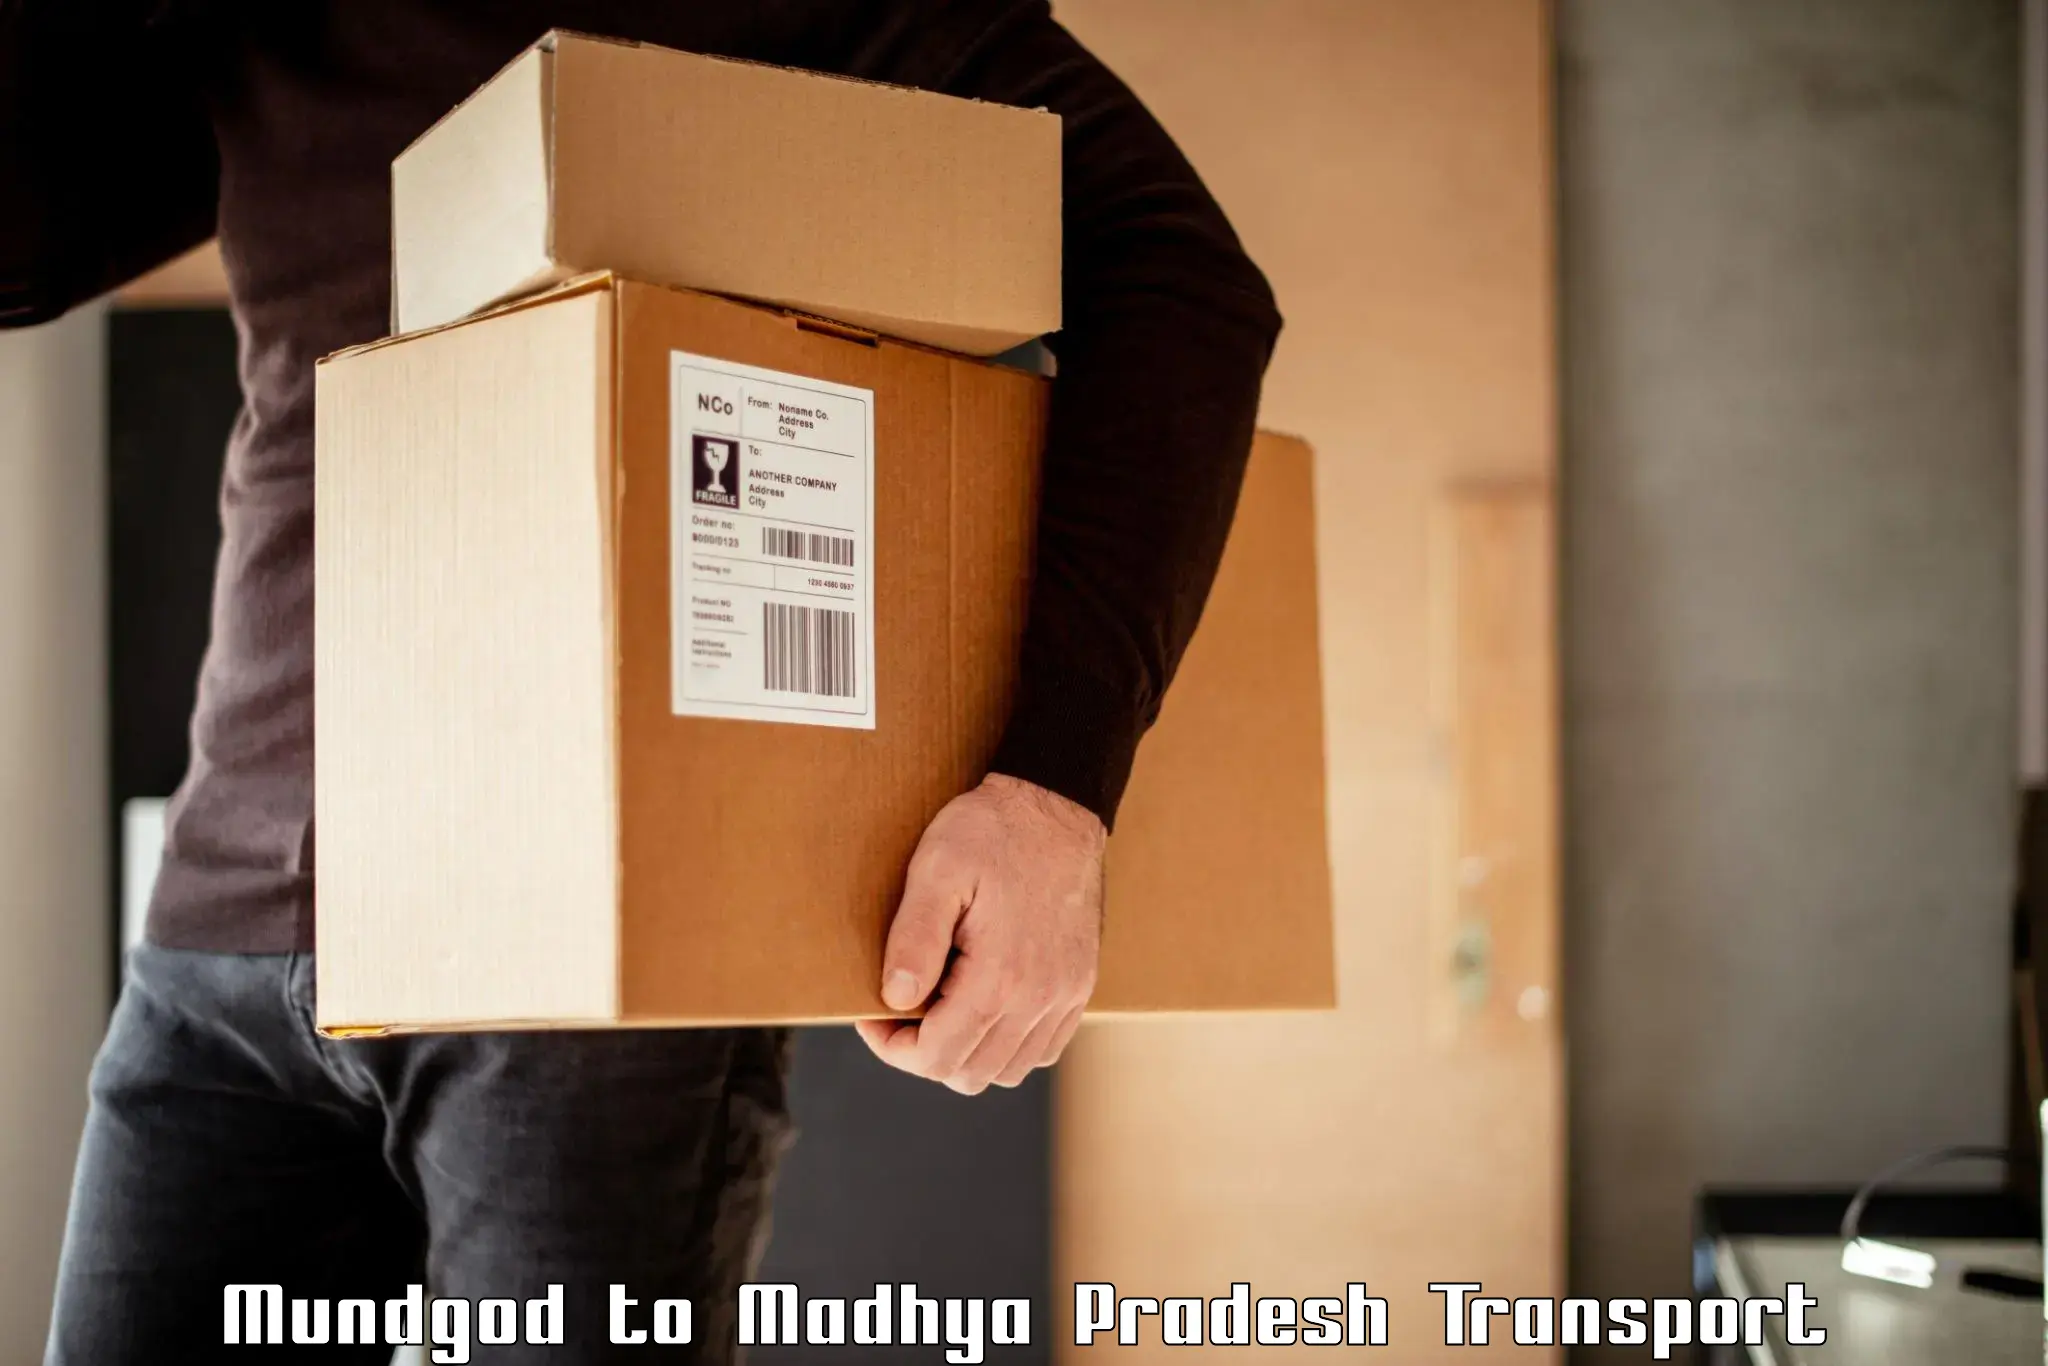 Truck transport companies in India Mundgod to Chand Chaurai